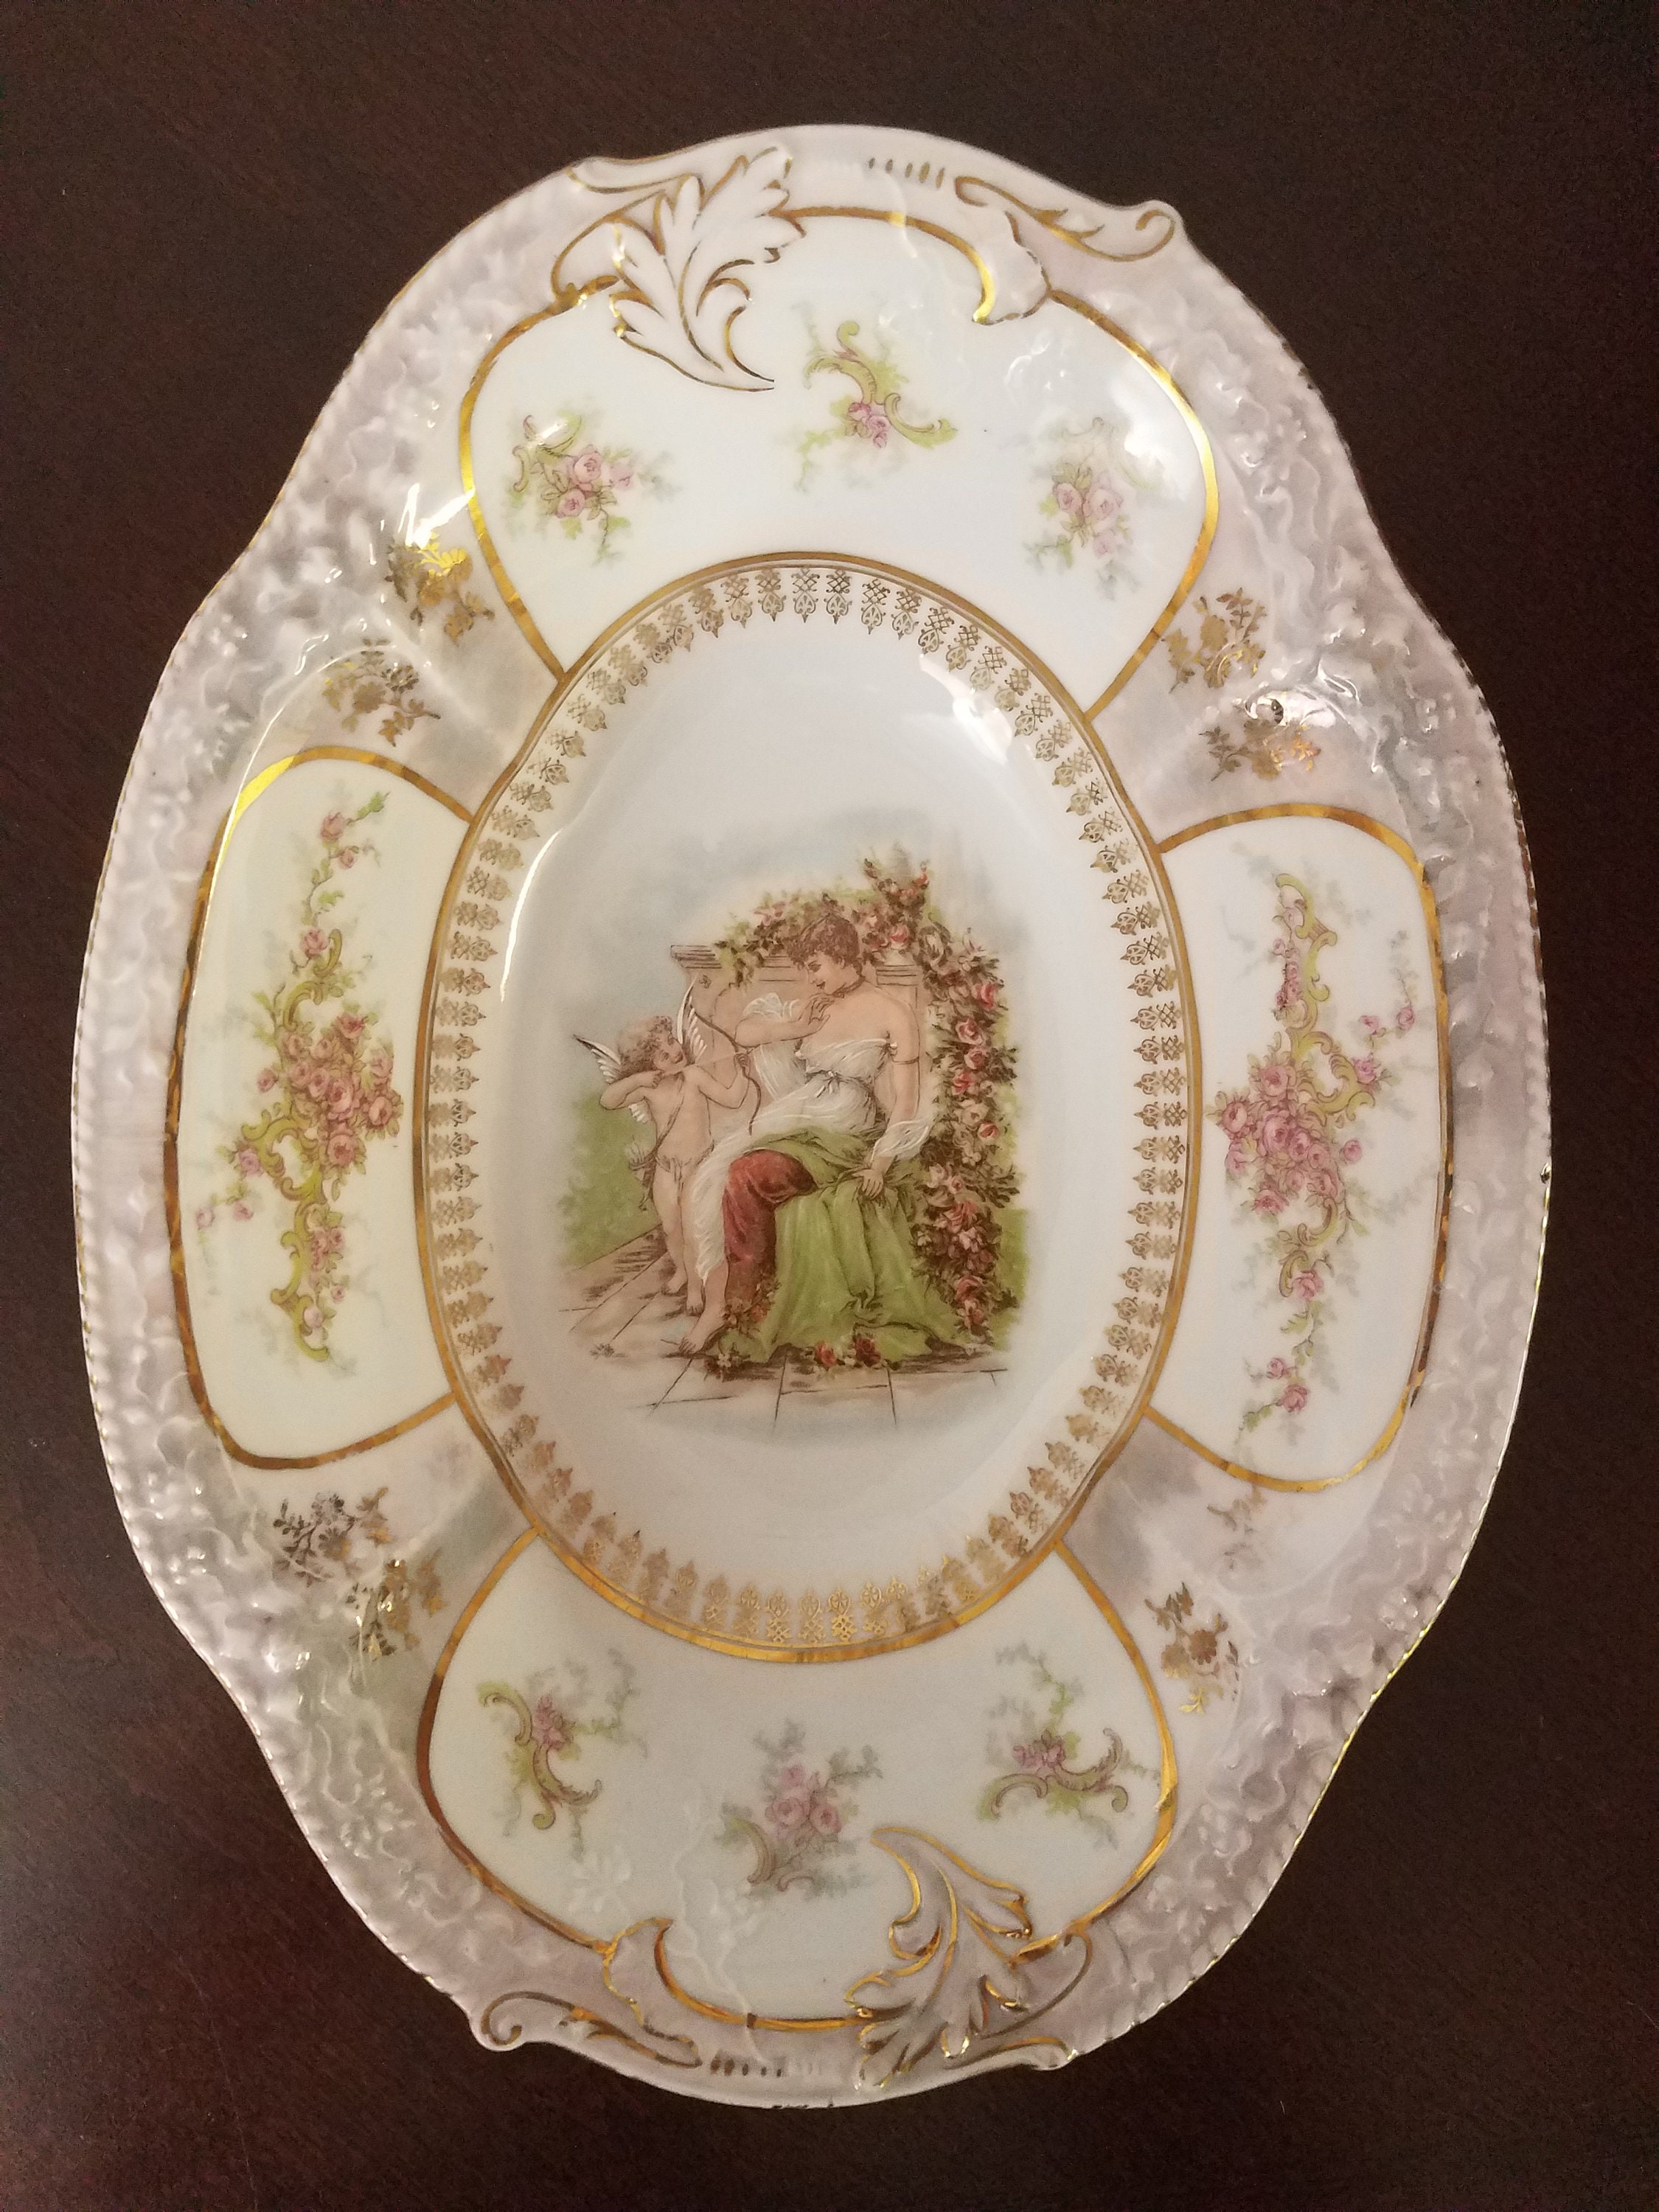 Arrow Scherzer & Aiming Image S. of Cupid 1880-1918 at Heart a - Zeh an Young an Bowl Z. Bavaria Porcelain Co With Etsy Woman\'s